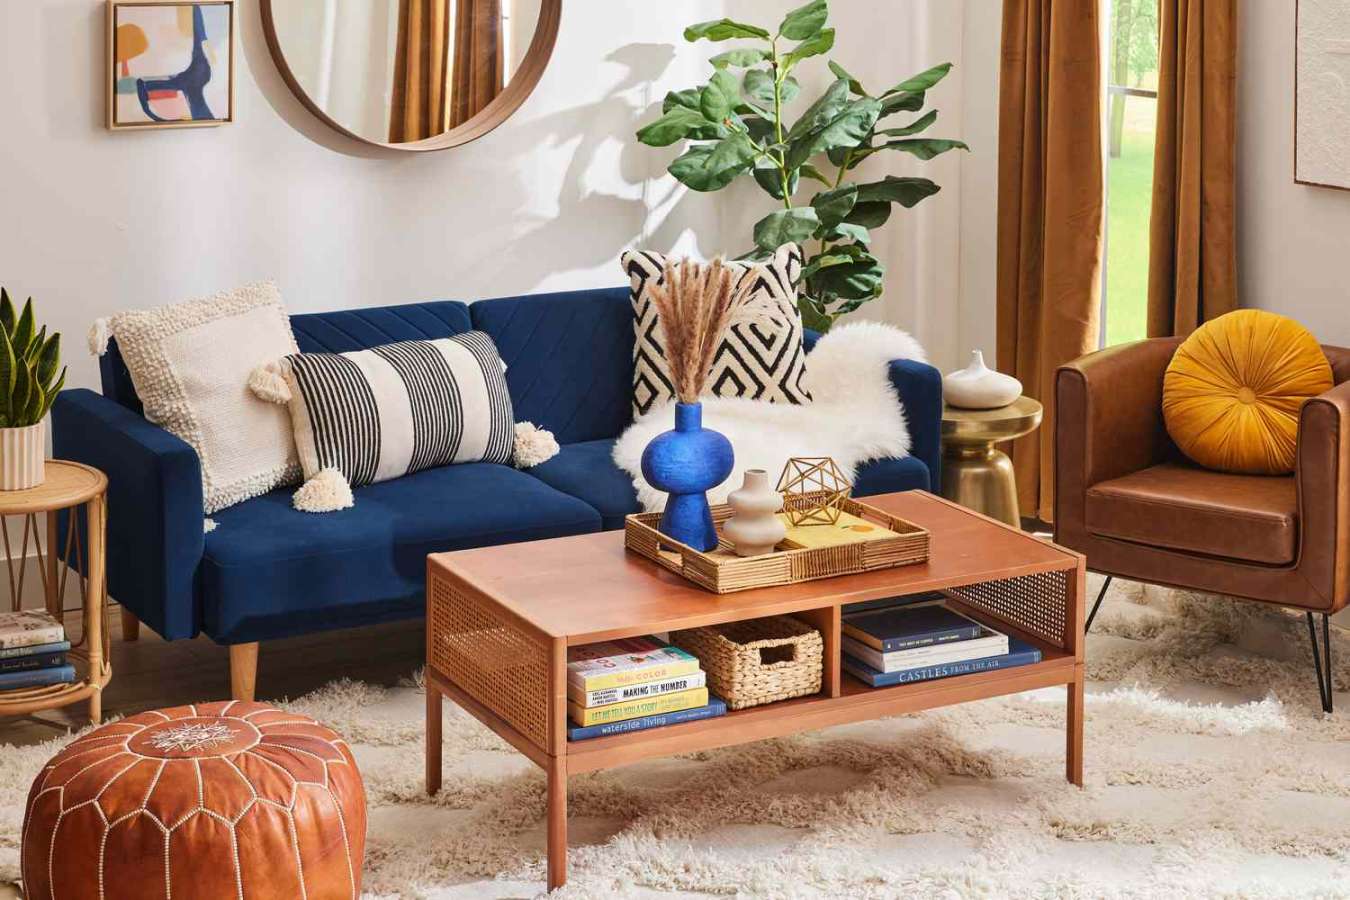 Design Tips for Blue Couches in Living Rooms